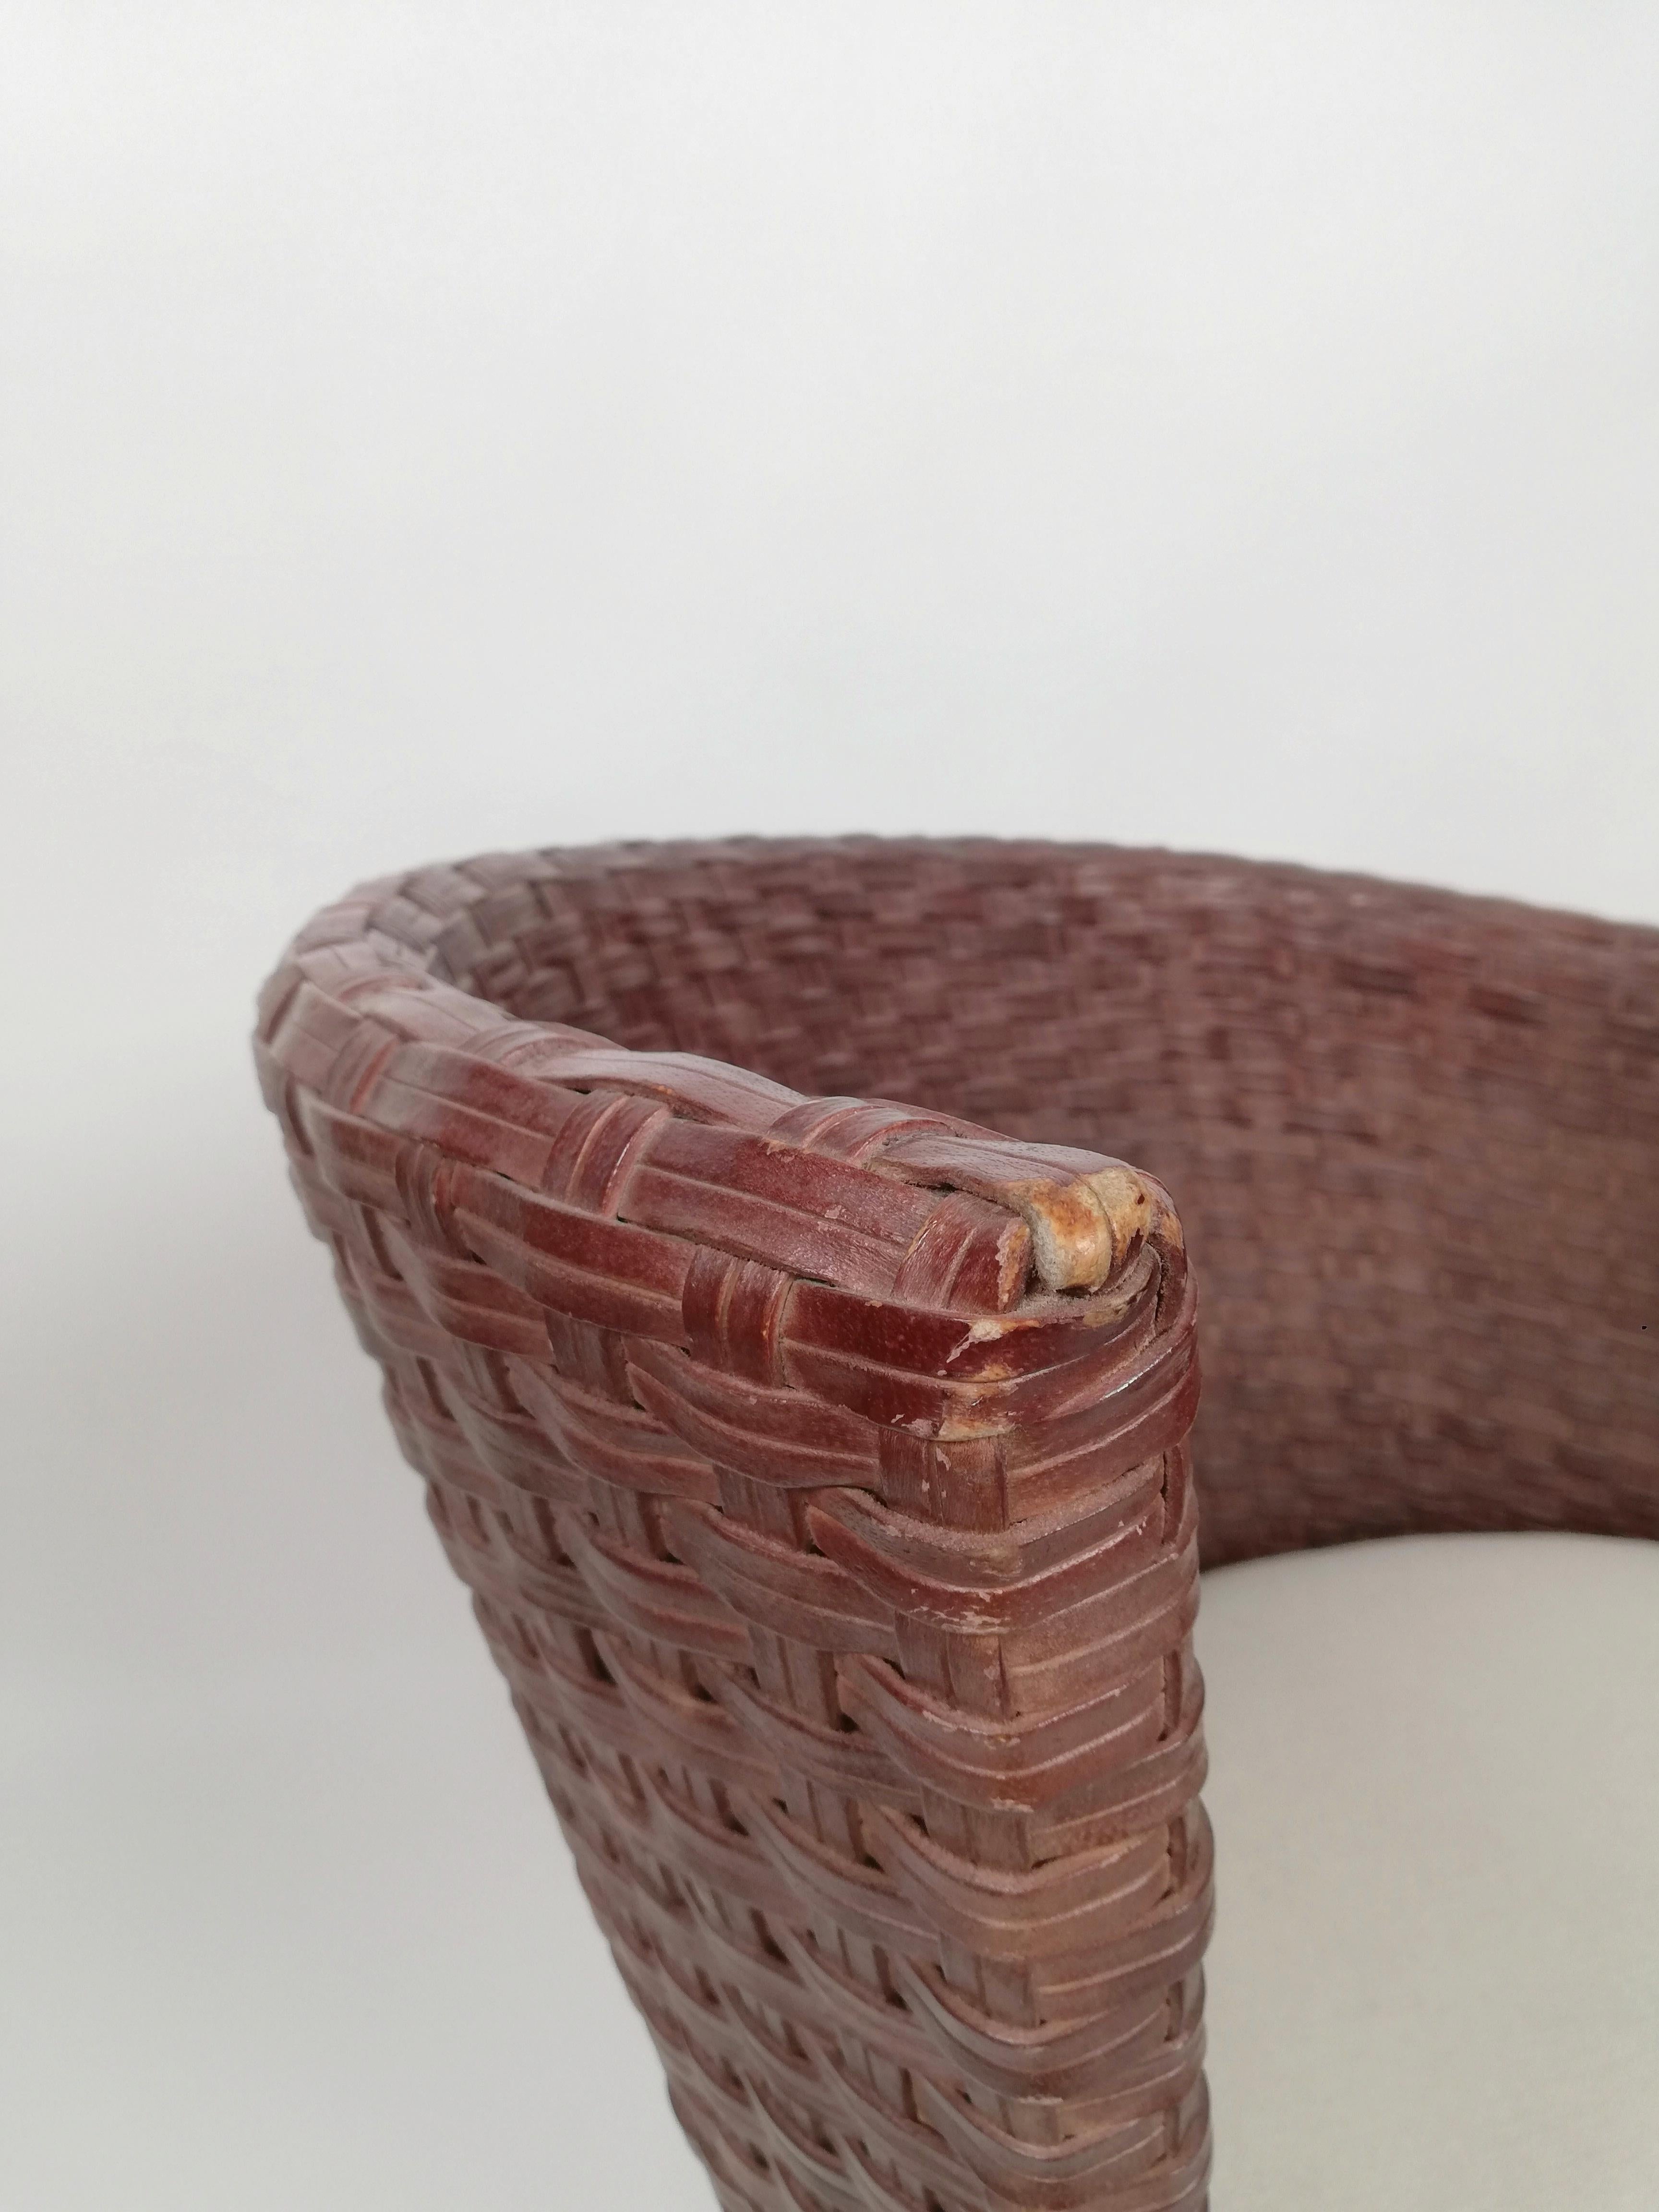 Post Modern Vis à Vis Sofa by Nico Devito in Hand-Woven, Leather Wood and Bamboo For Sale 1